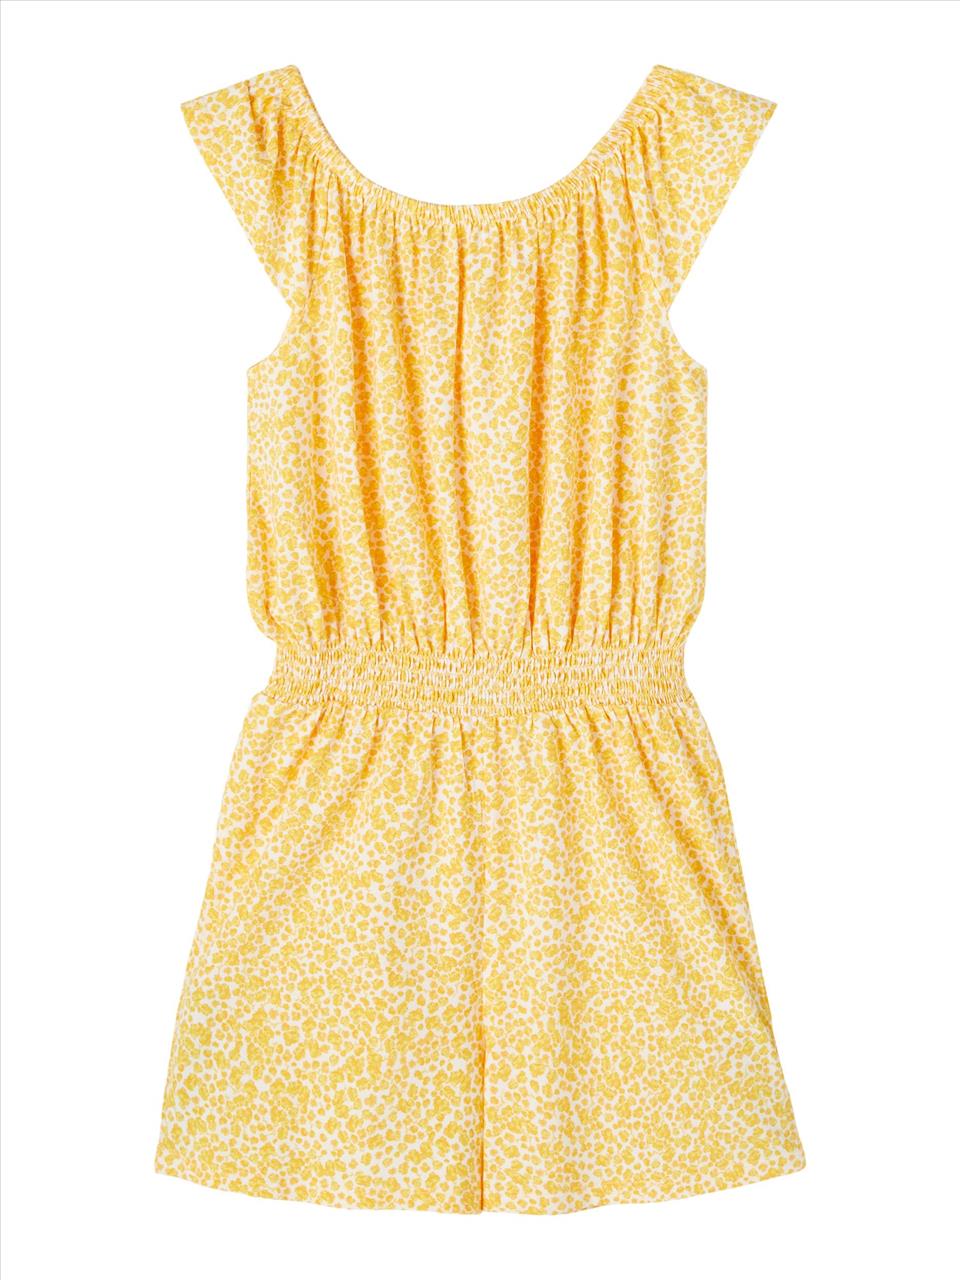 PLAYSUIT SHORT YELLOW FLORAL  NAME IT S8-14